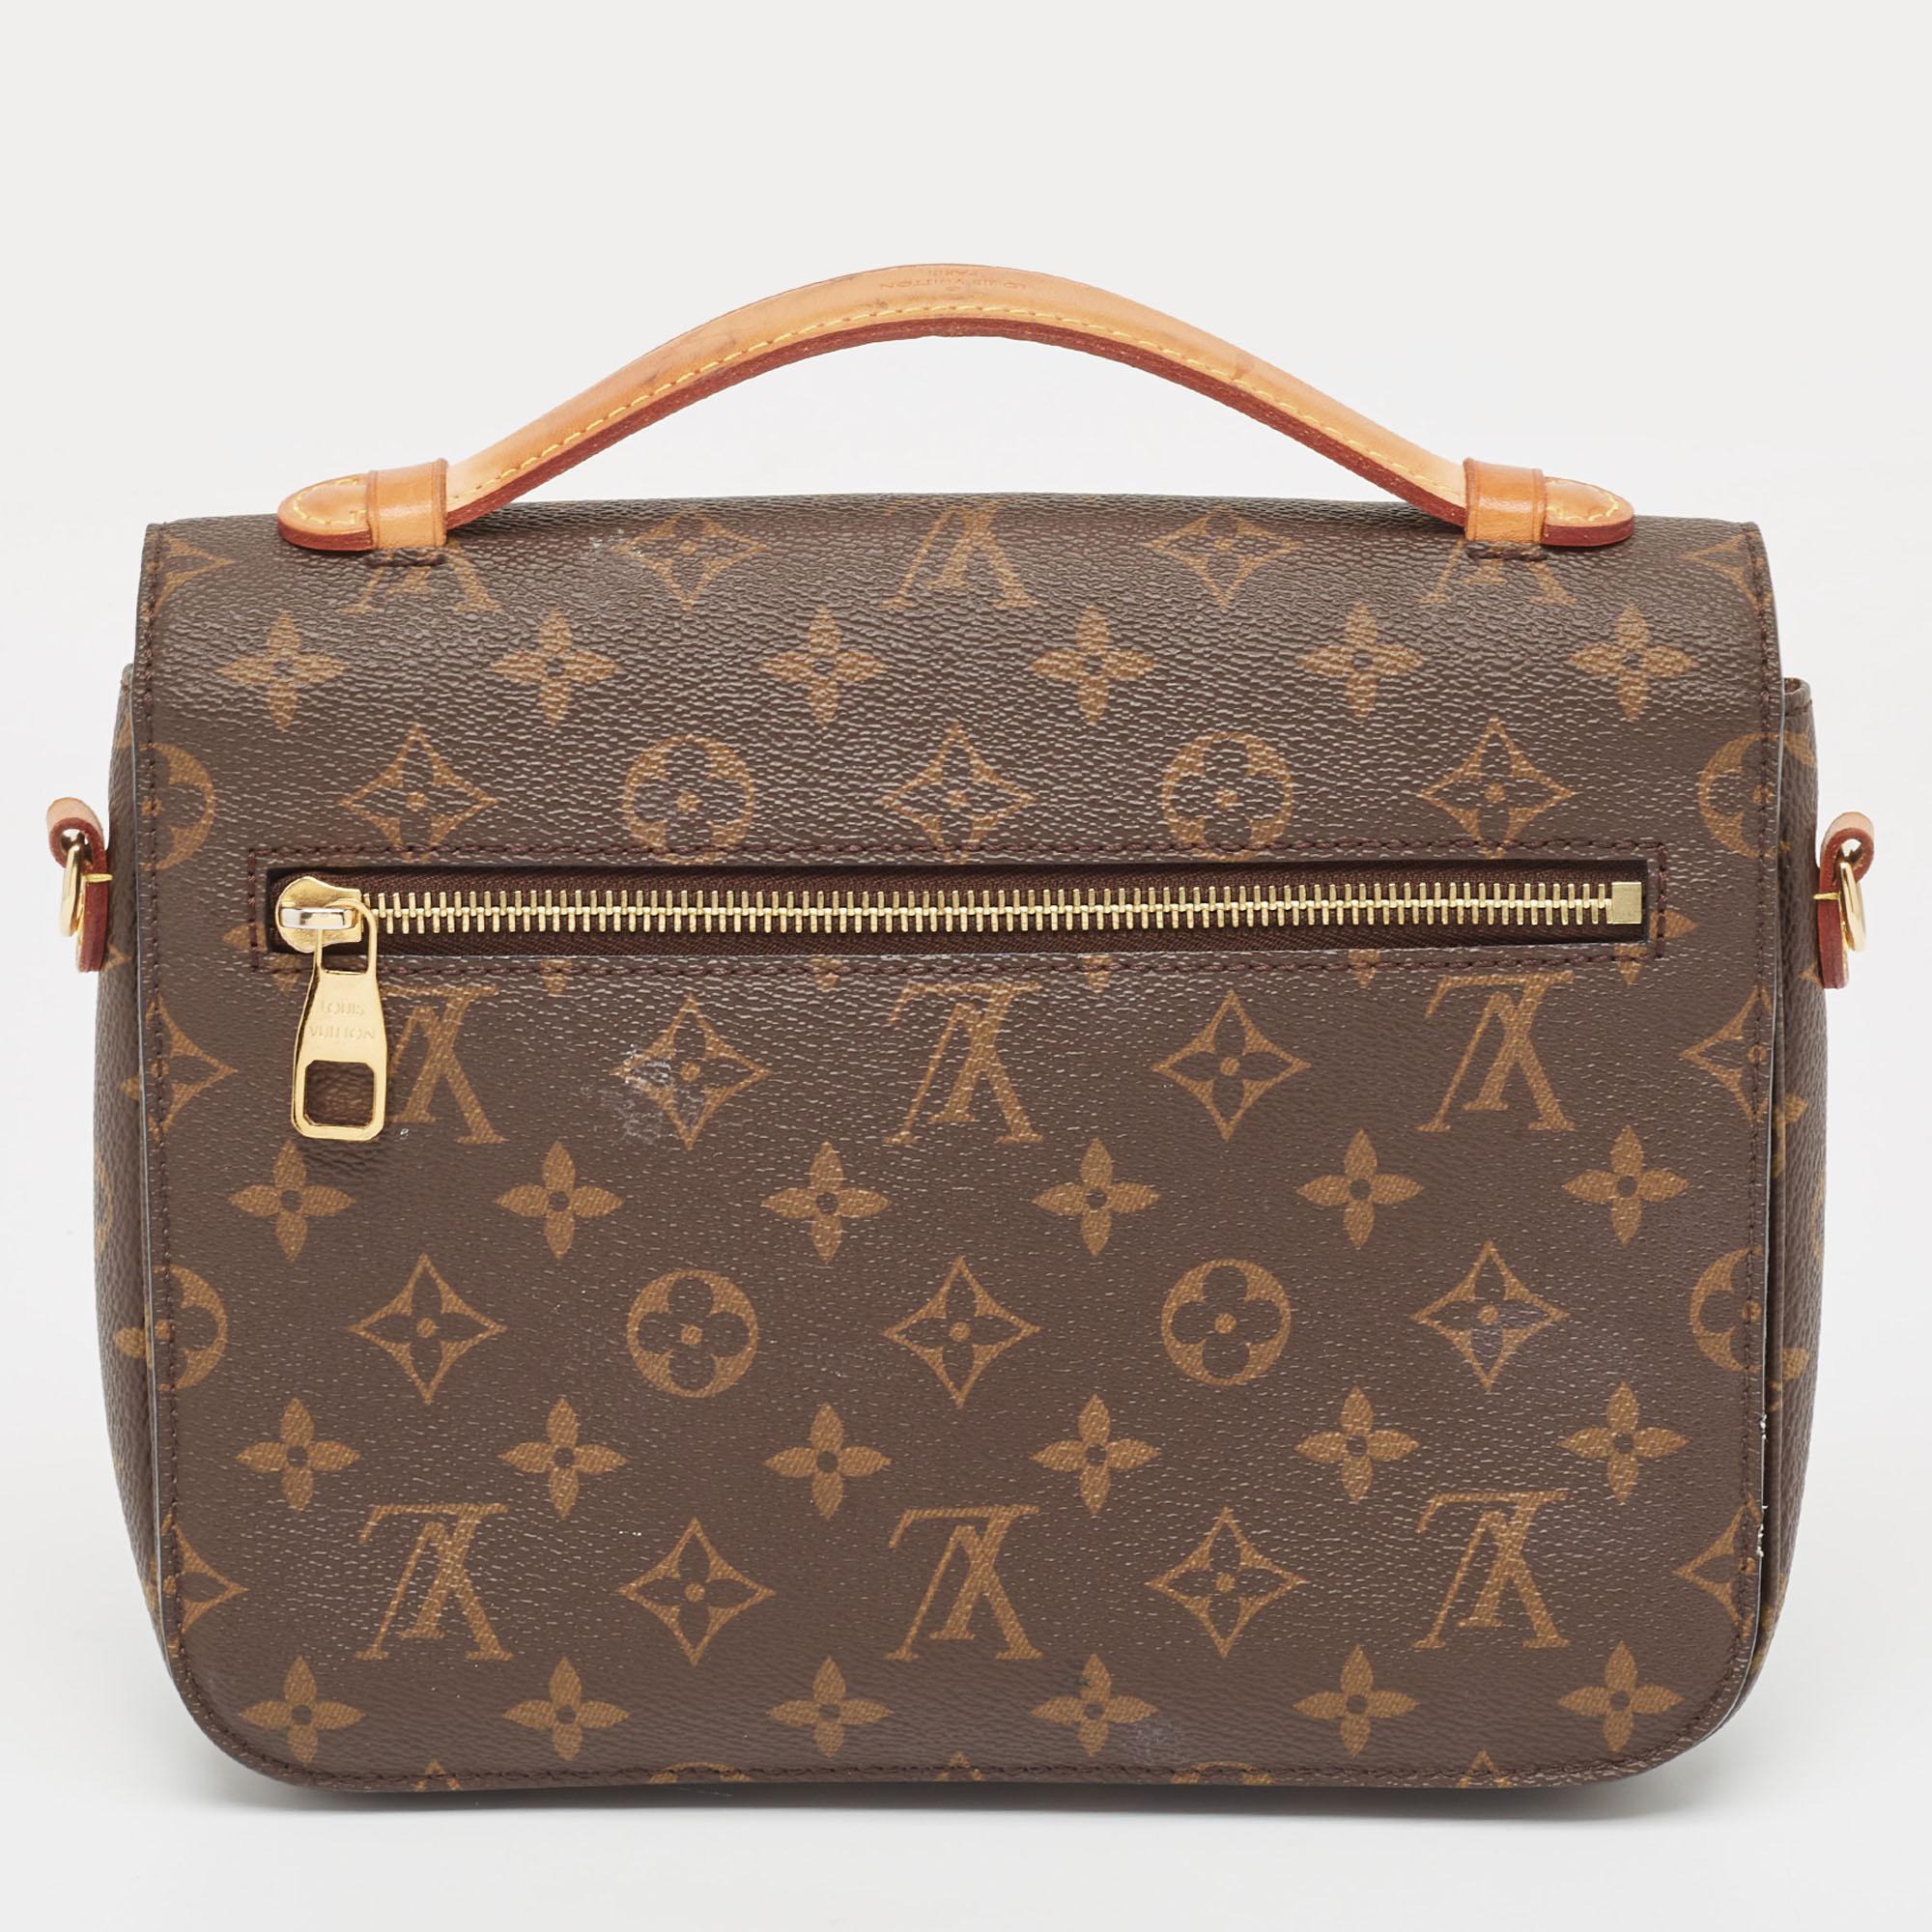 There’s no mistaking the interlaid LV symbols and the flower motifs on this Louis Vuitton bag. It is crafted from the luxury label’s signature monogram canvas and features a flap with a push lock closure, an adjustable and detachable strap, a short